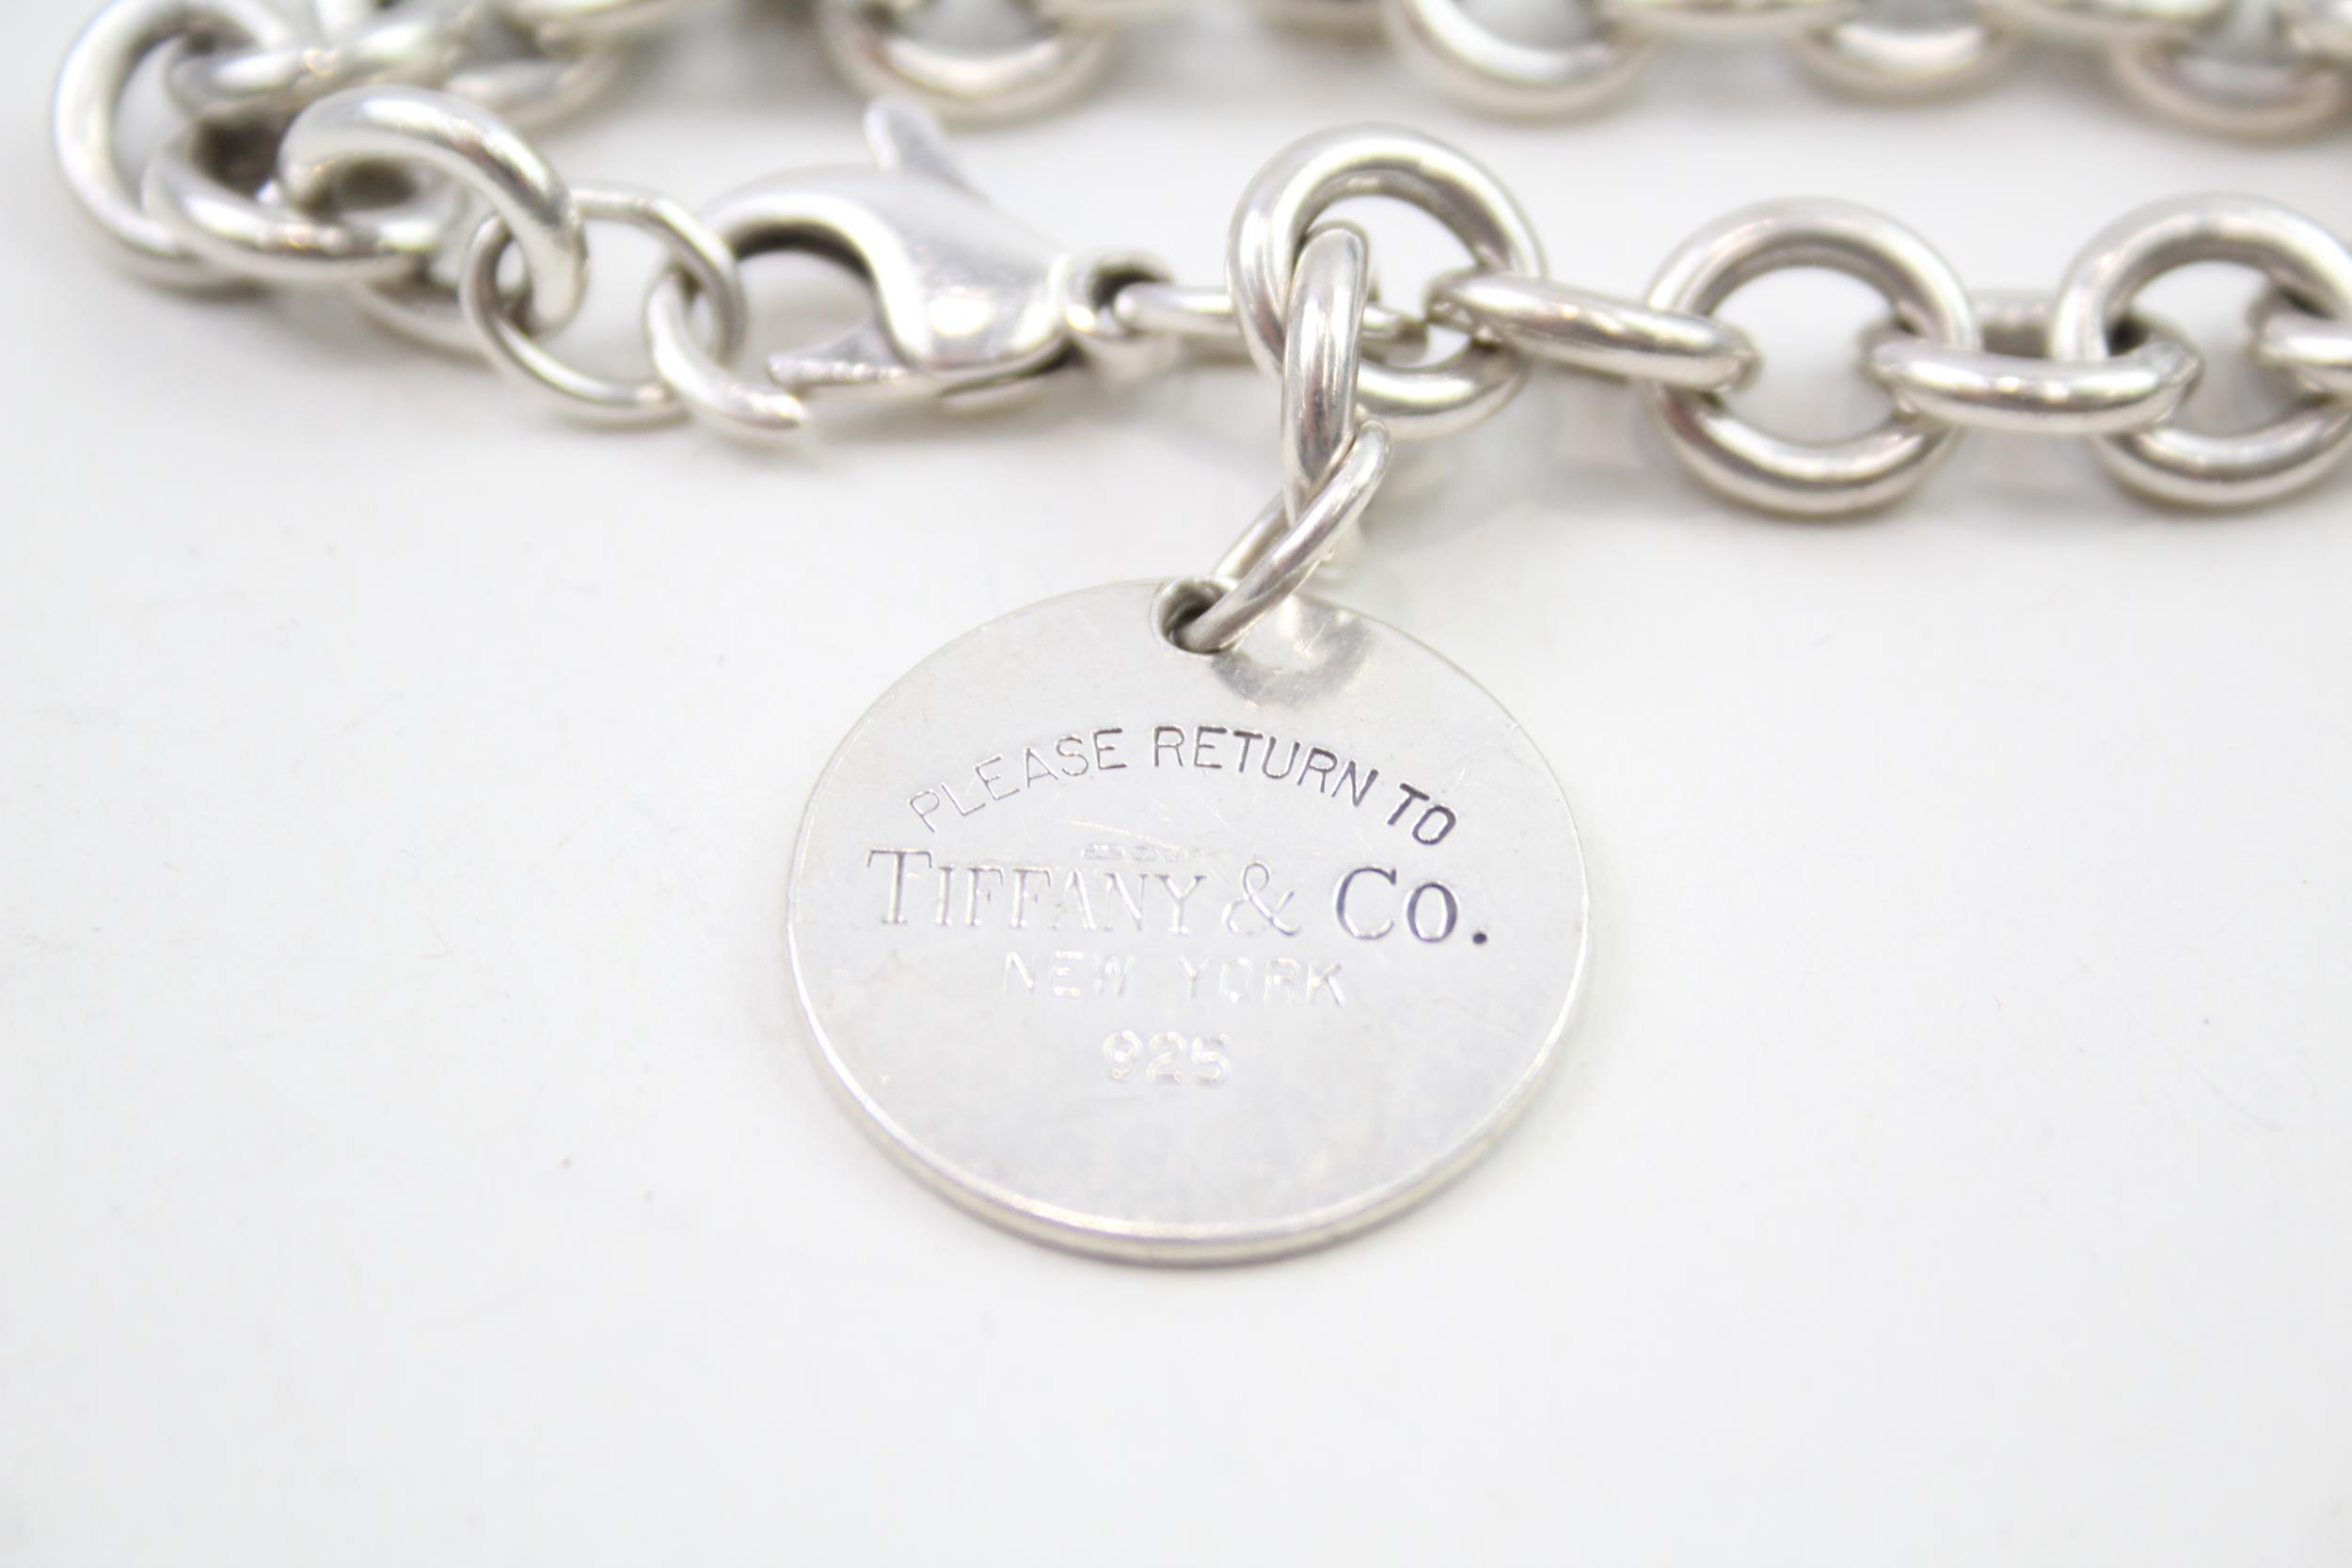 Silver belcher link bracelet with round tag by designer Tiffany & Co (38g) - Image 2 of 4